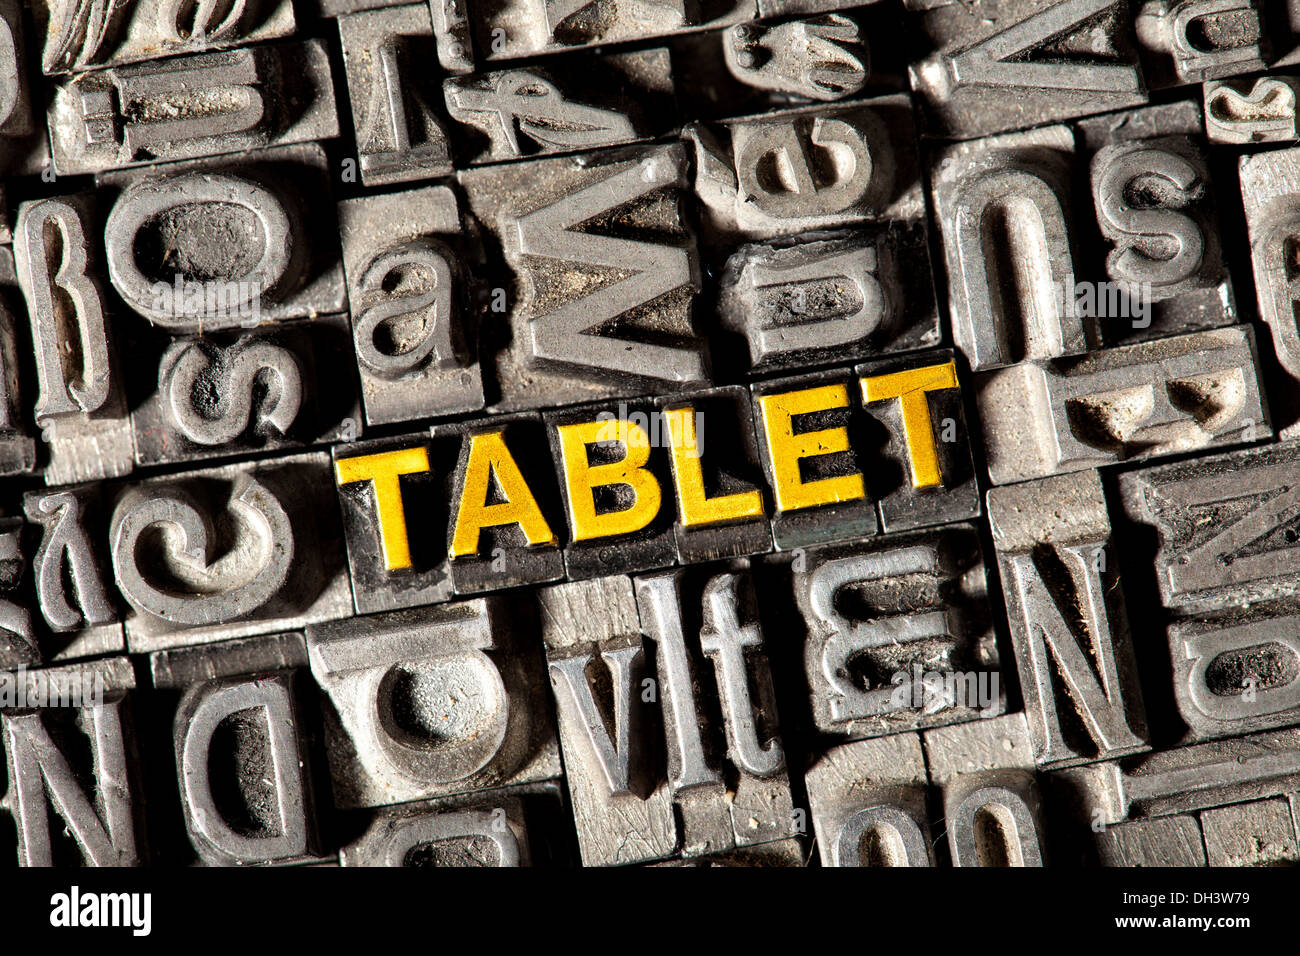 Old lead letters forming the word 'TABLET' Stock Photo